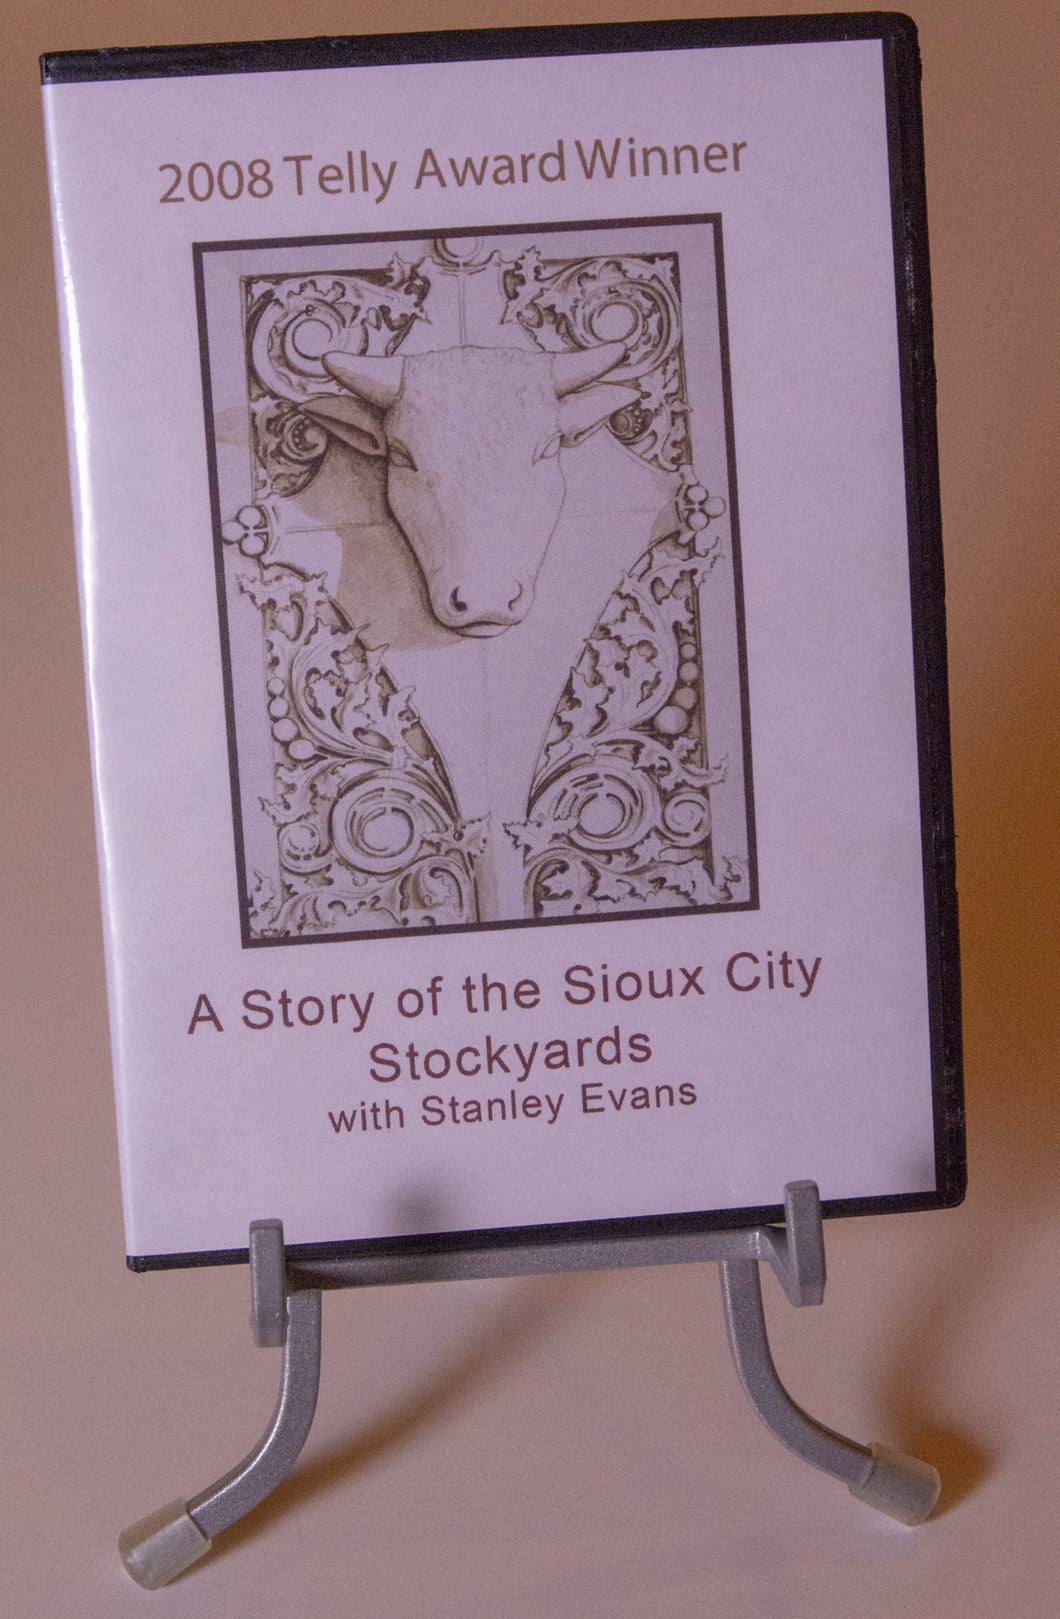 A Story of the Sioux City Stockyards DVD with Stanley Evans